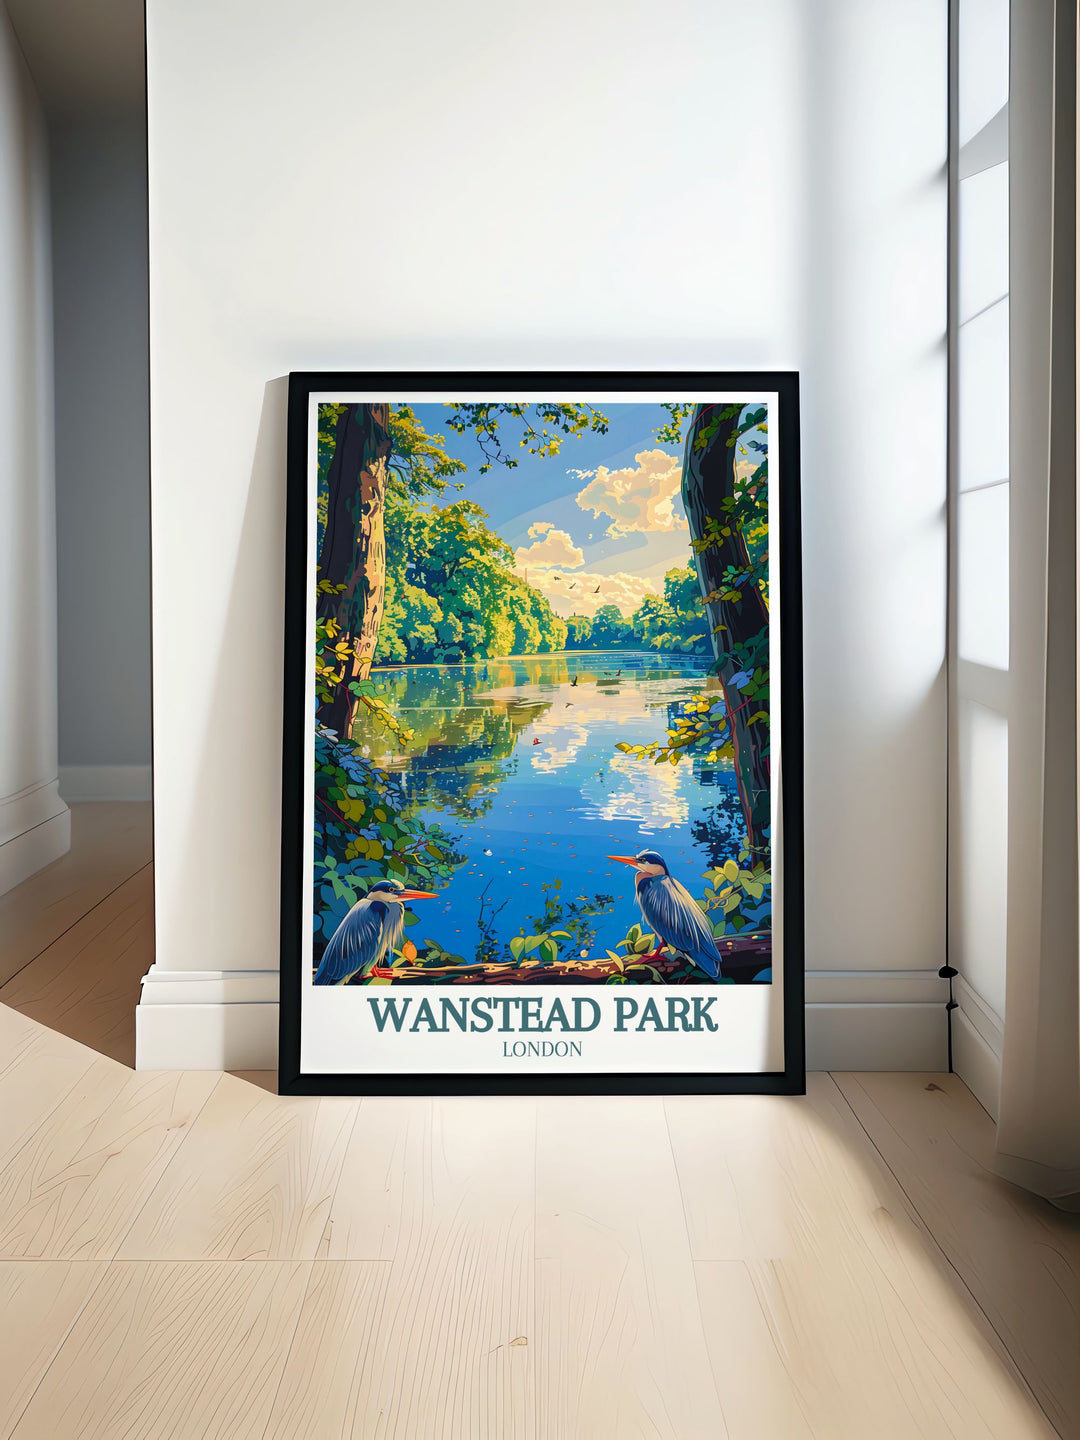 Exquisite Wanstead Park travel poster featuring lush green landscapes and serene water scenes. Perfect for nature lovers looking to bring a piece of East Londons tranquil beauty into their home with a stunning vintage travel print.